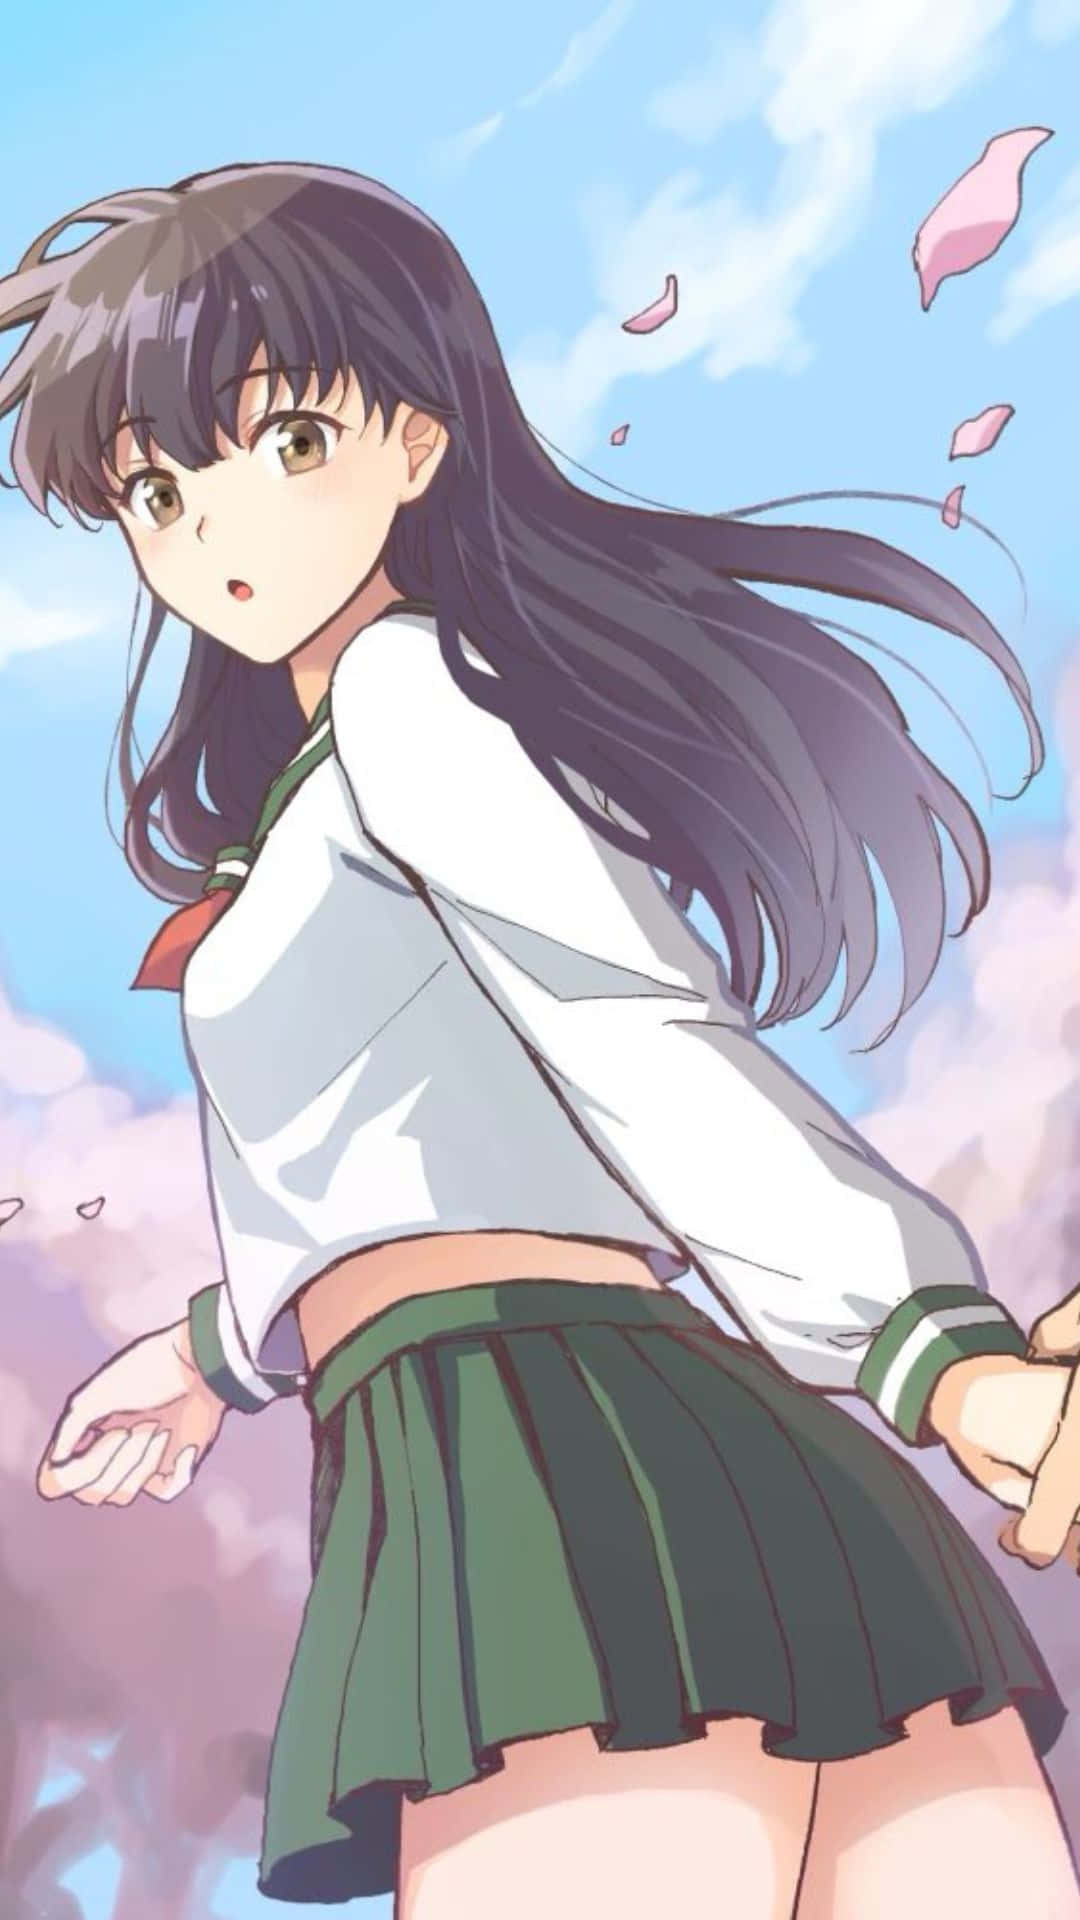 Kagome Higurashi wielding her bow and arrow against a serene backdrop Wallpaper